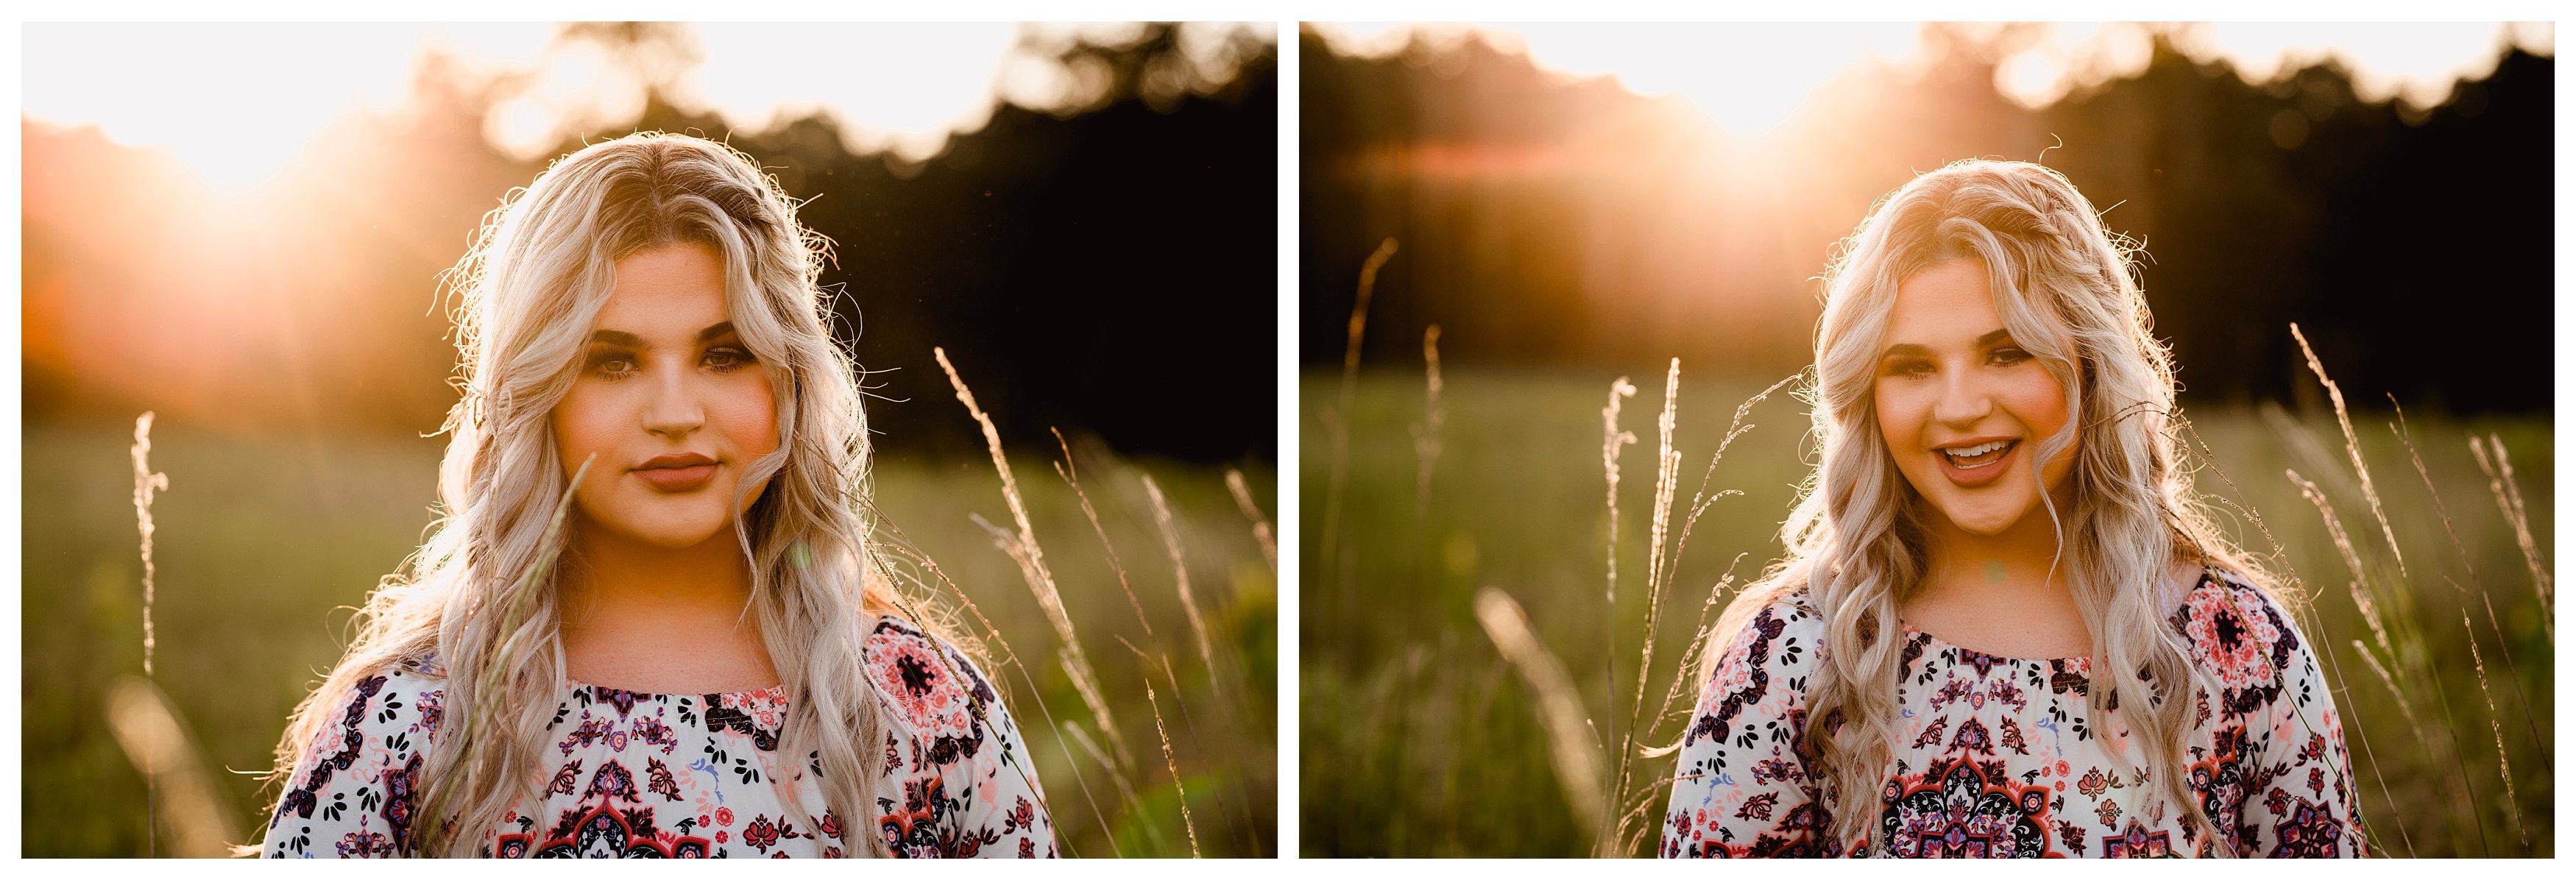 Golden hour senior pictures taken in field with sunflares.